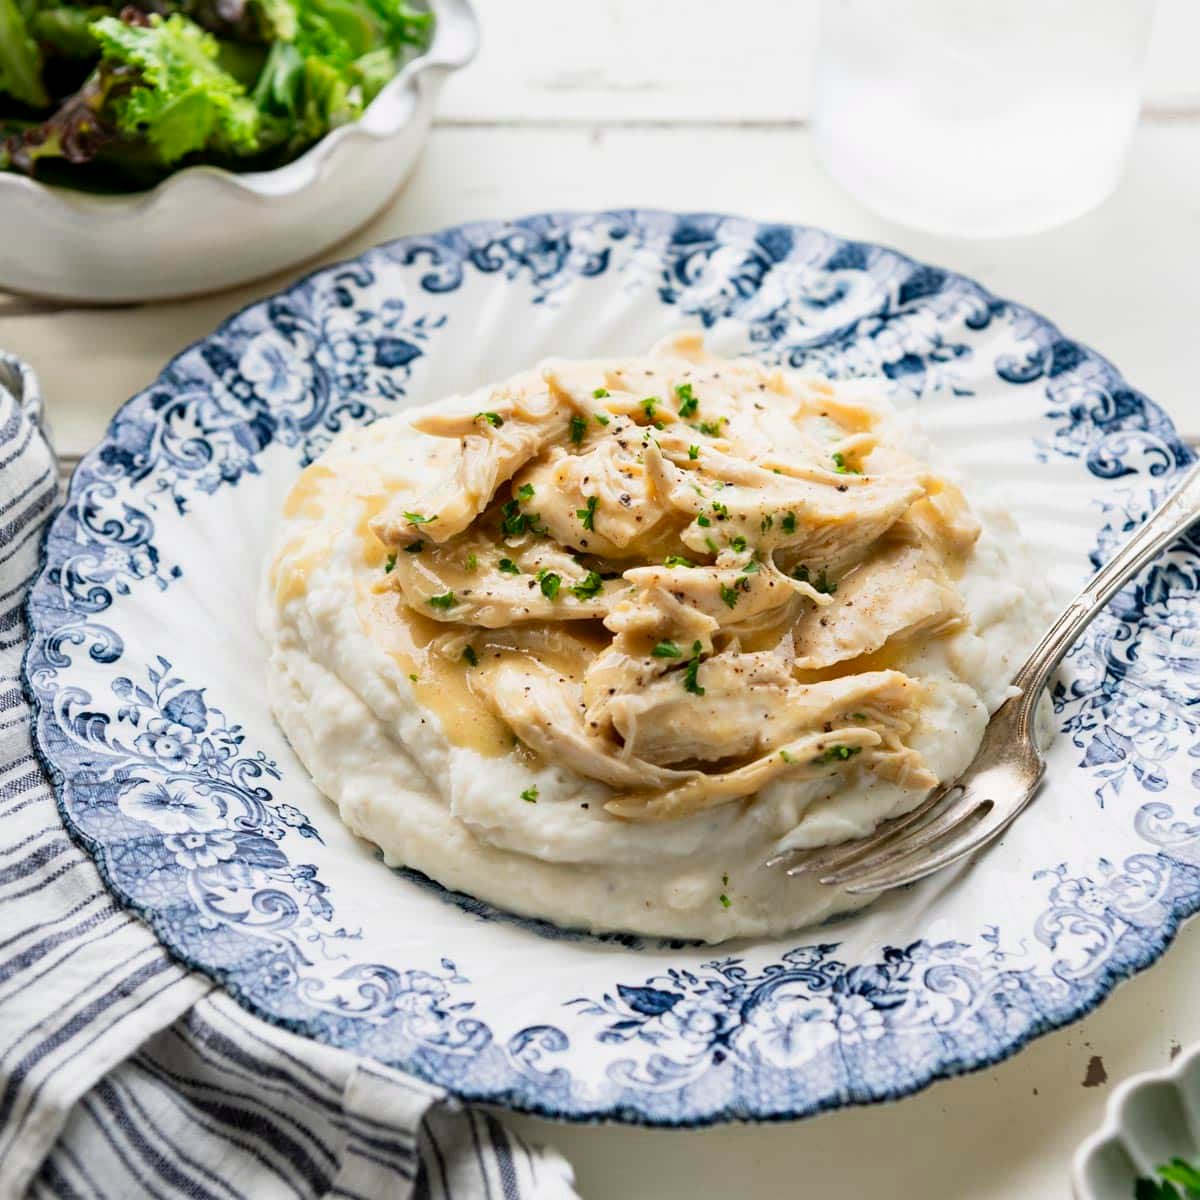 Square side shot of a plate of 3 ingredient crockpot chicken and gravy on top of mashed potatoes.